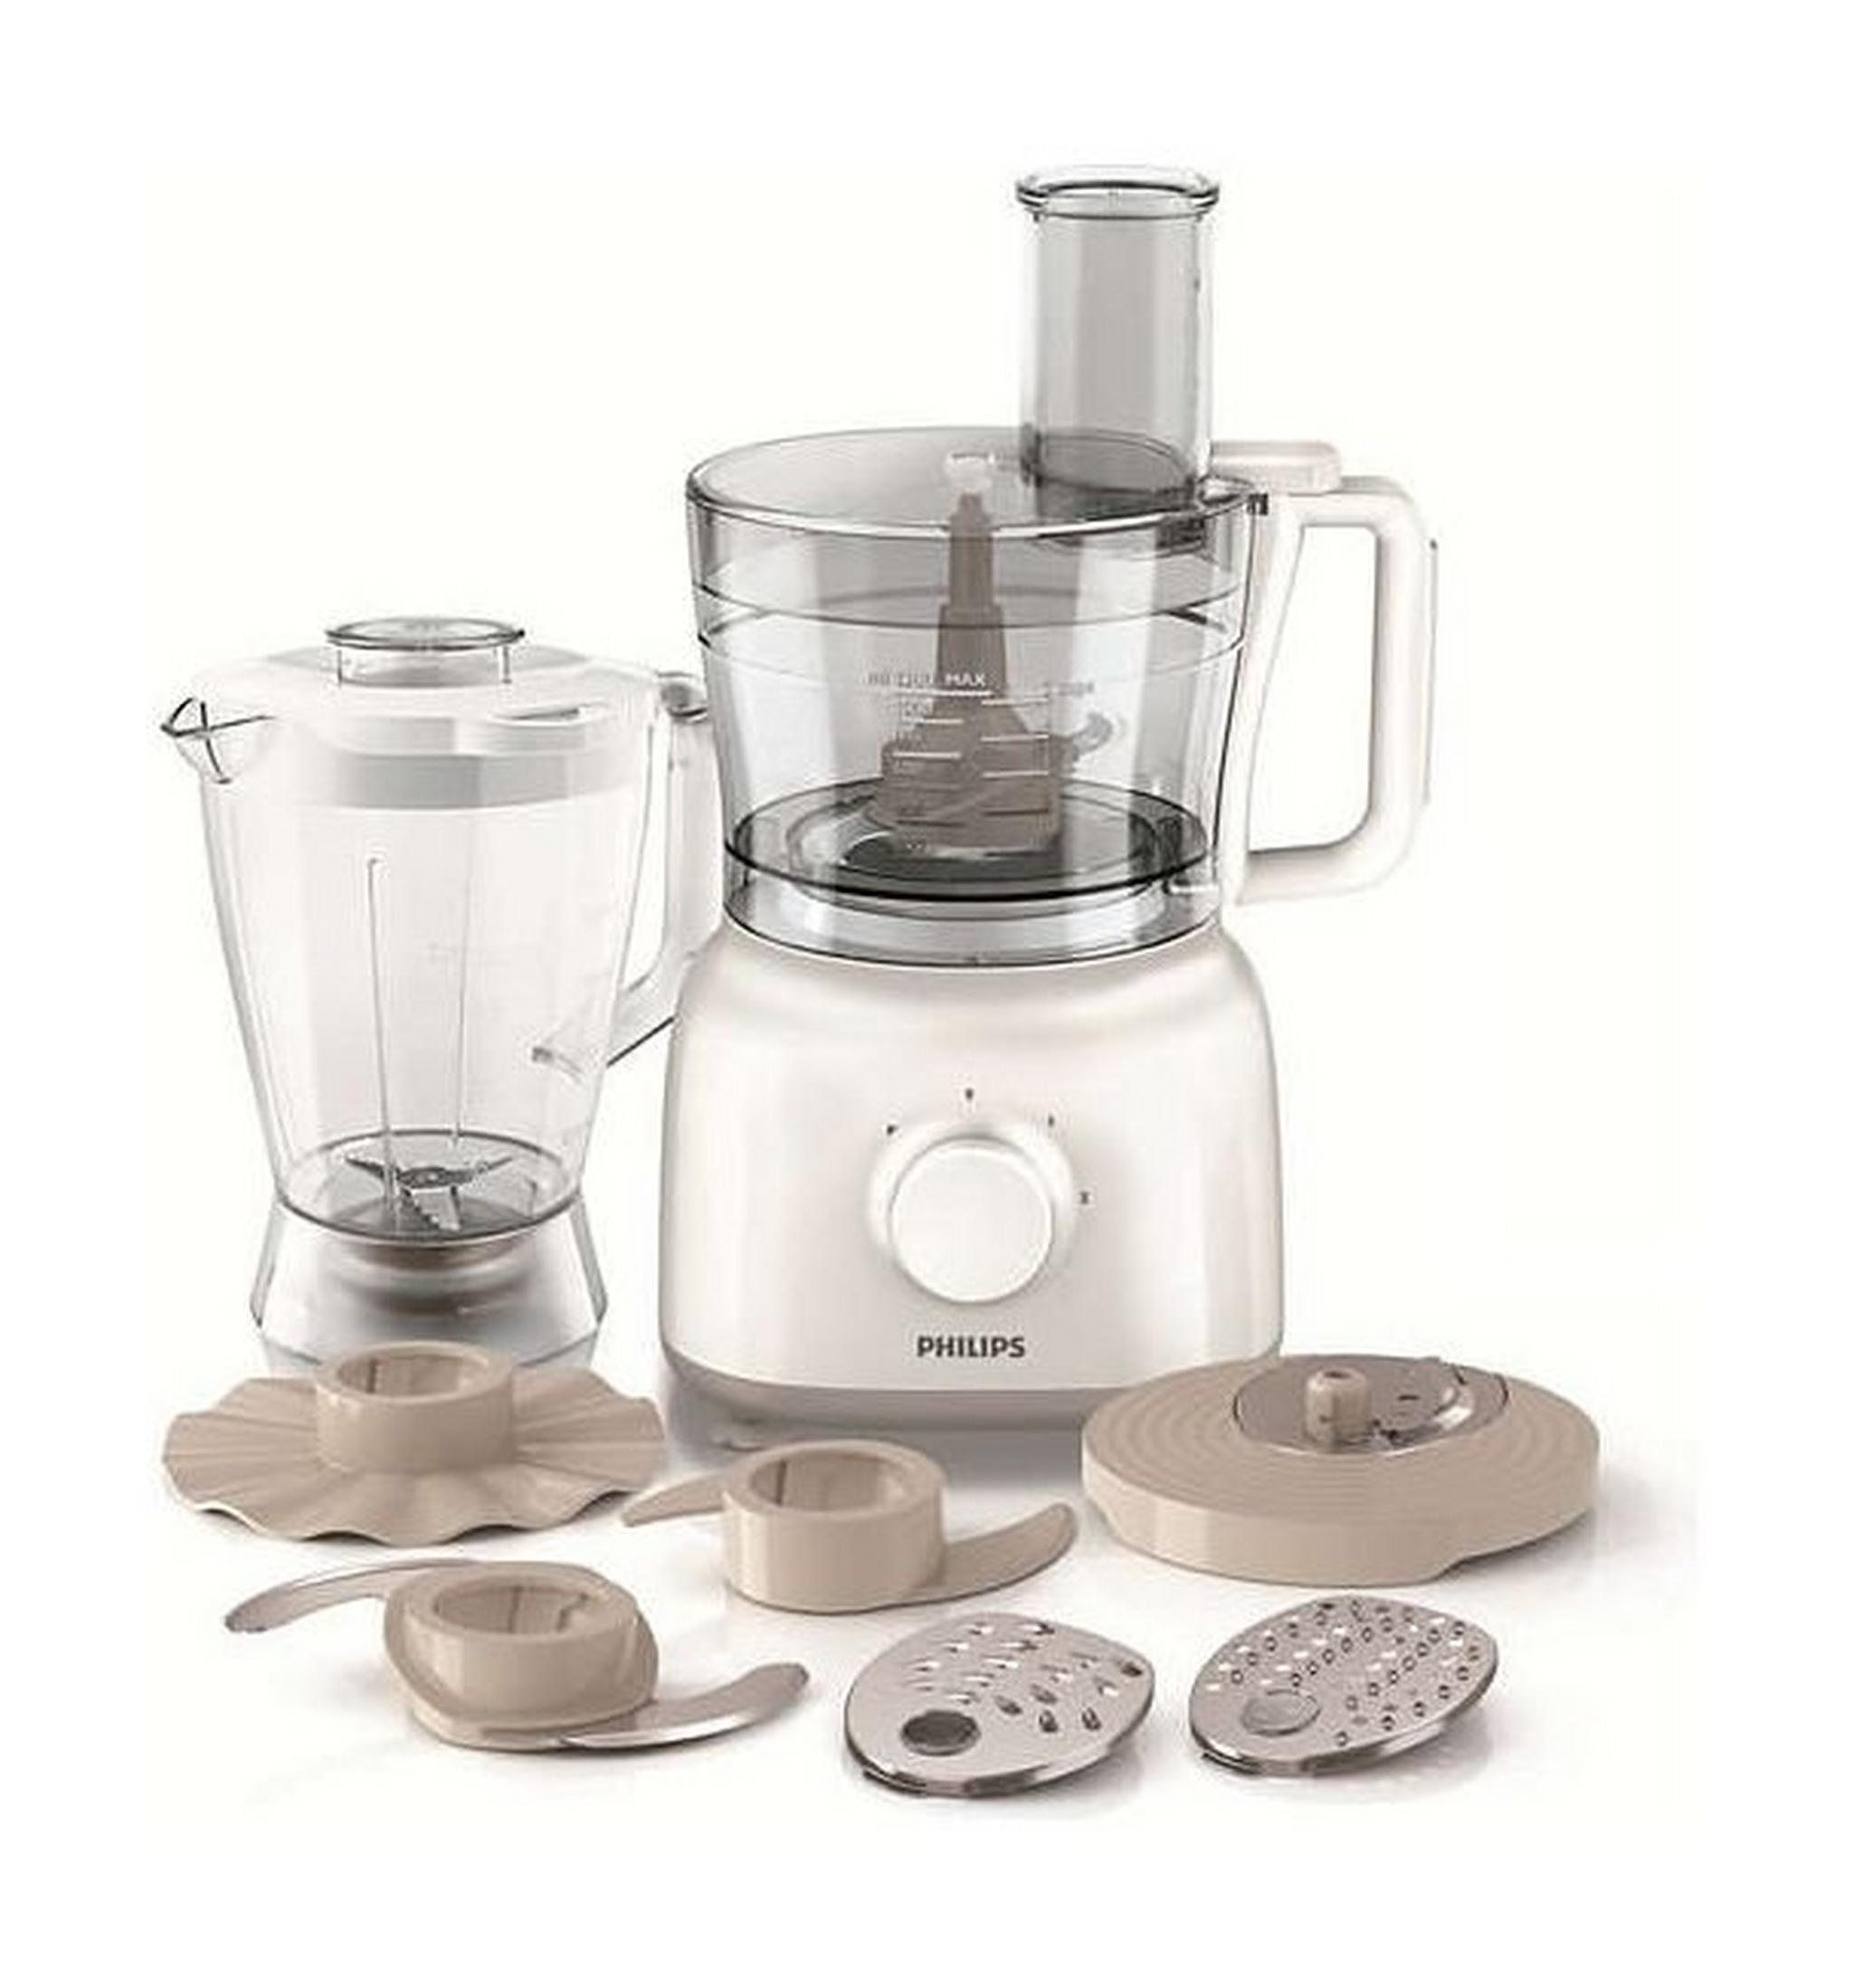 Philips Daily Collection Food Processor 650 Watt with Bowl HR7628/01